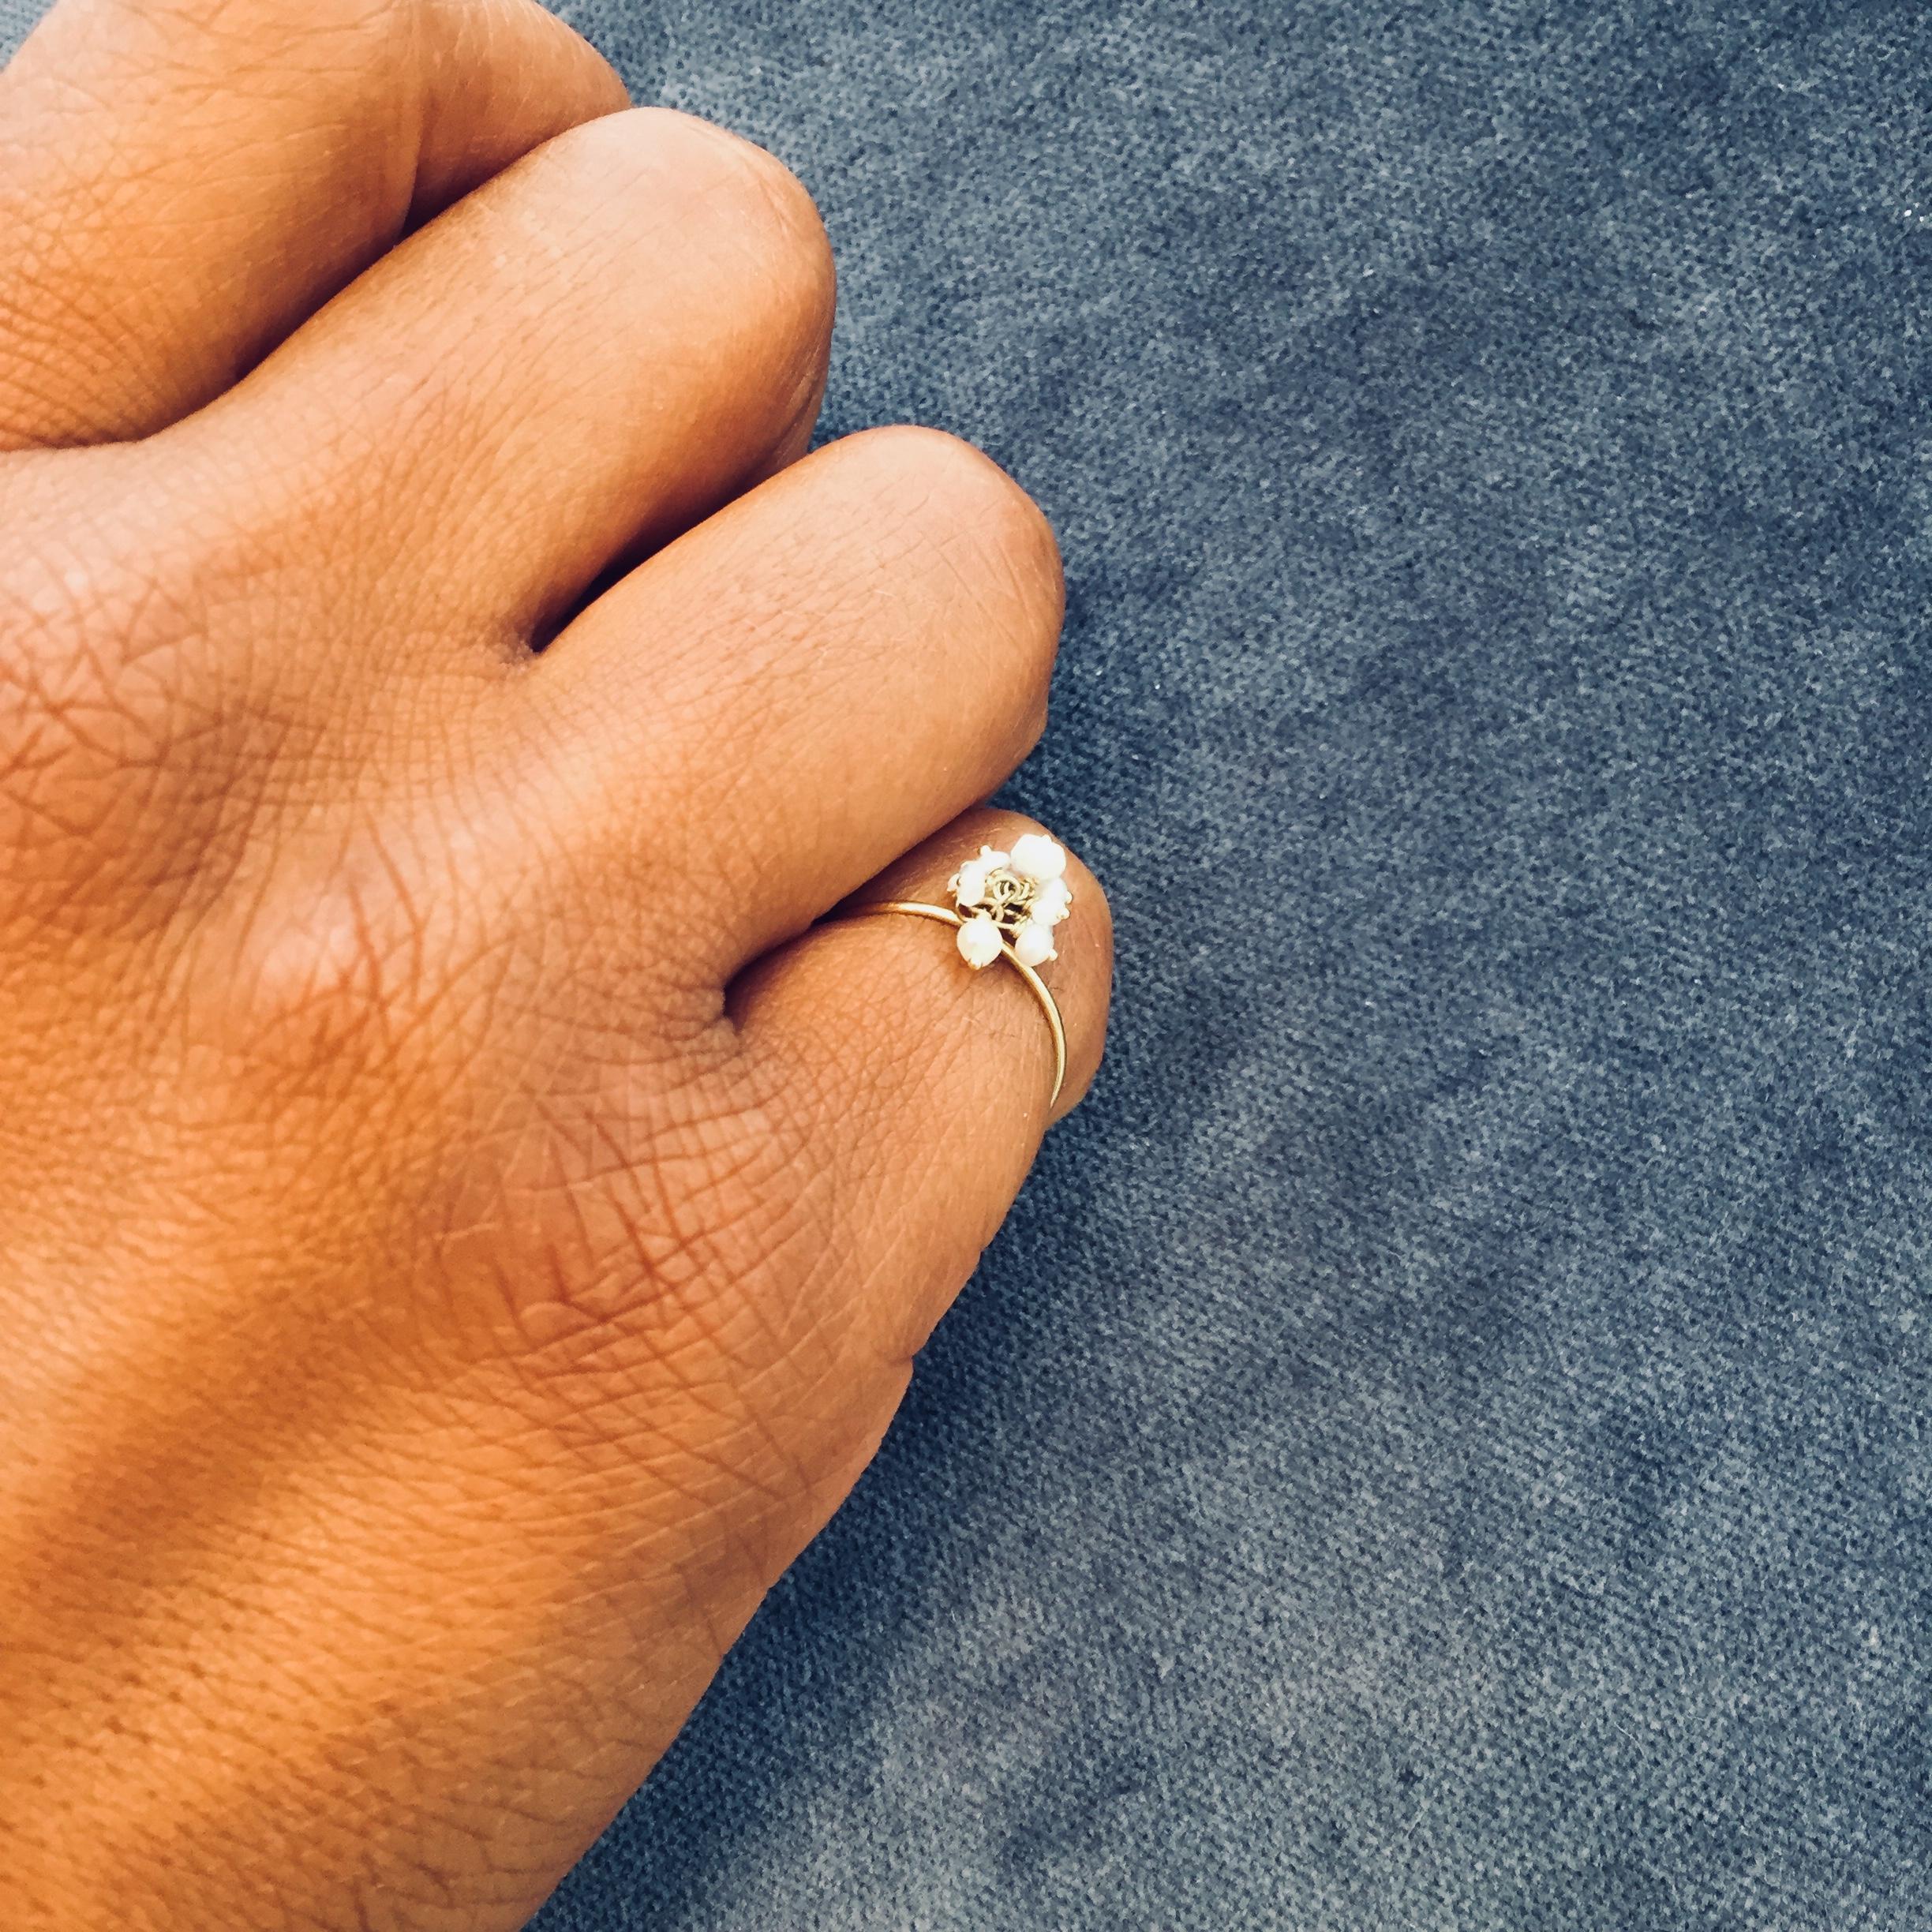 This Sweet Pea 18k yellow gold ring with a cluster of white seed pearls and moonstones is a pearl ring with a twist! The dainty 0.8mm thick band really lets the luminous cluster take center stage as it moves. Handmade in the Sweet Pea London